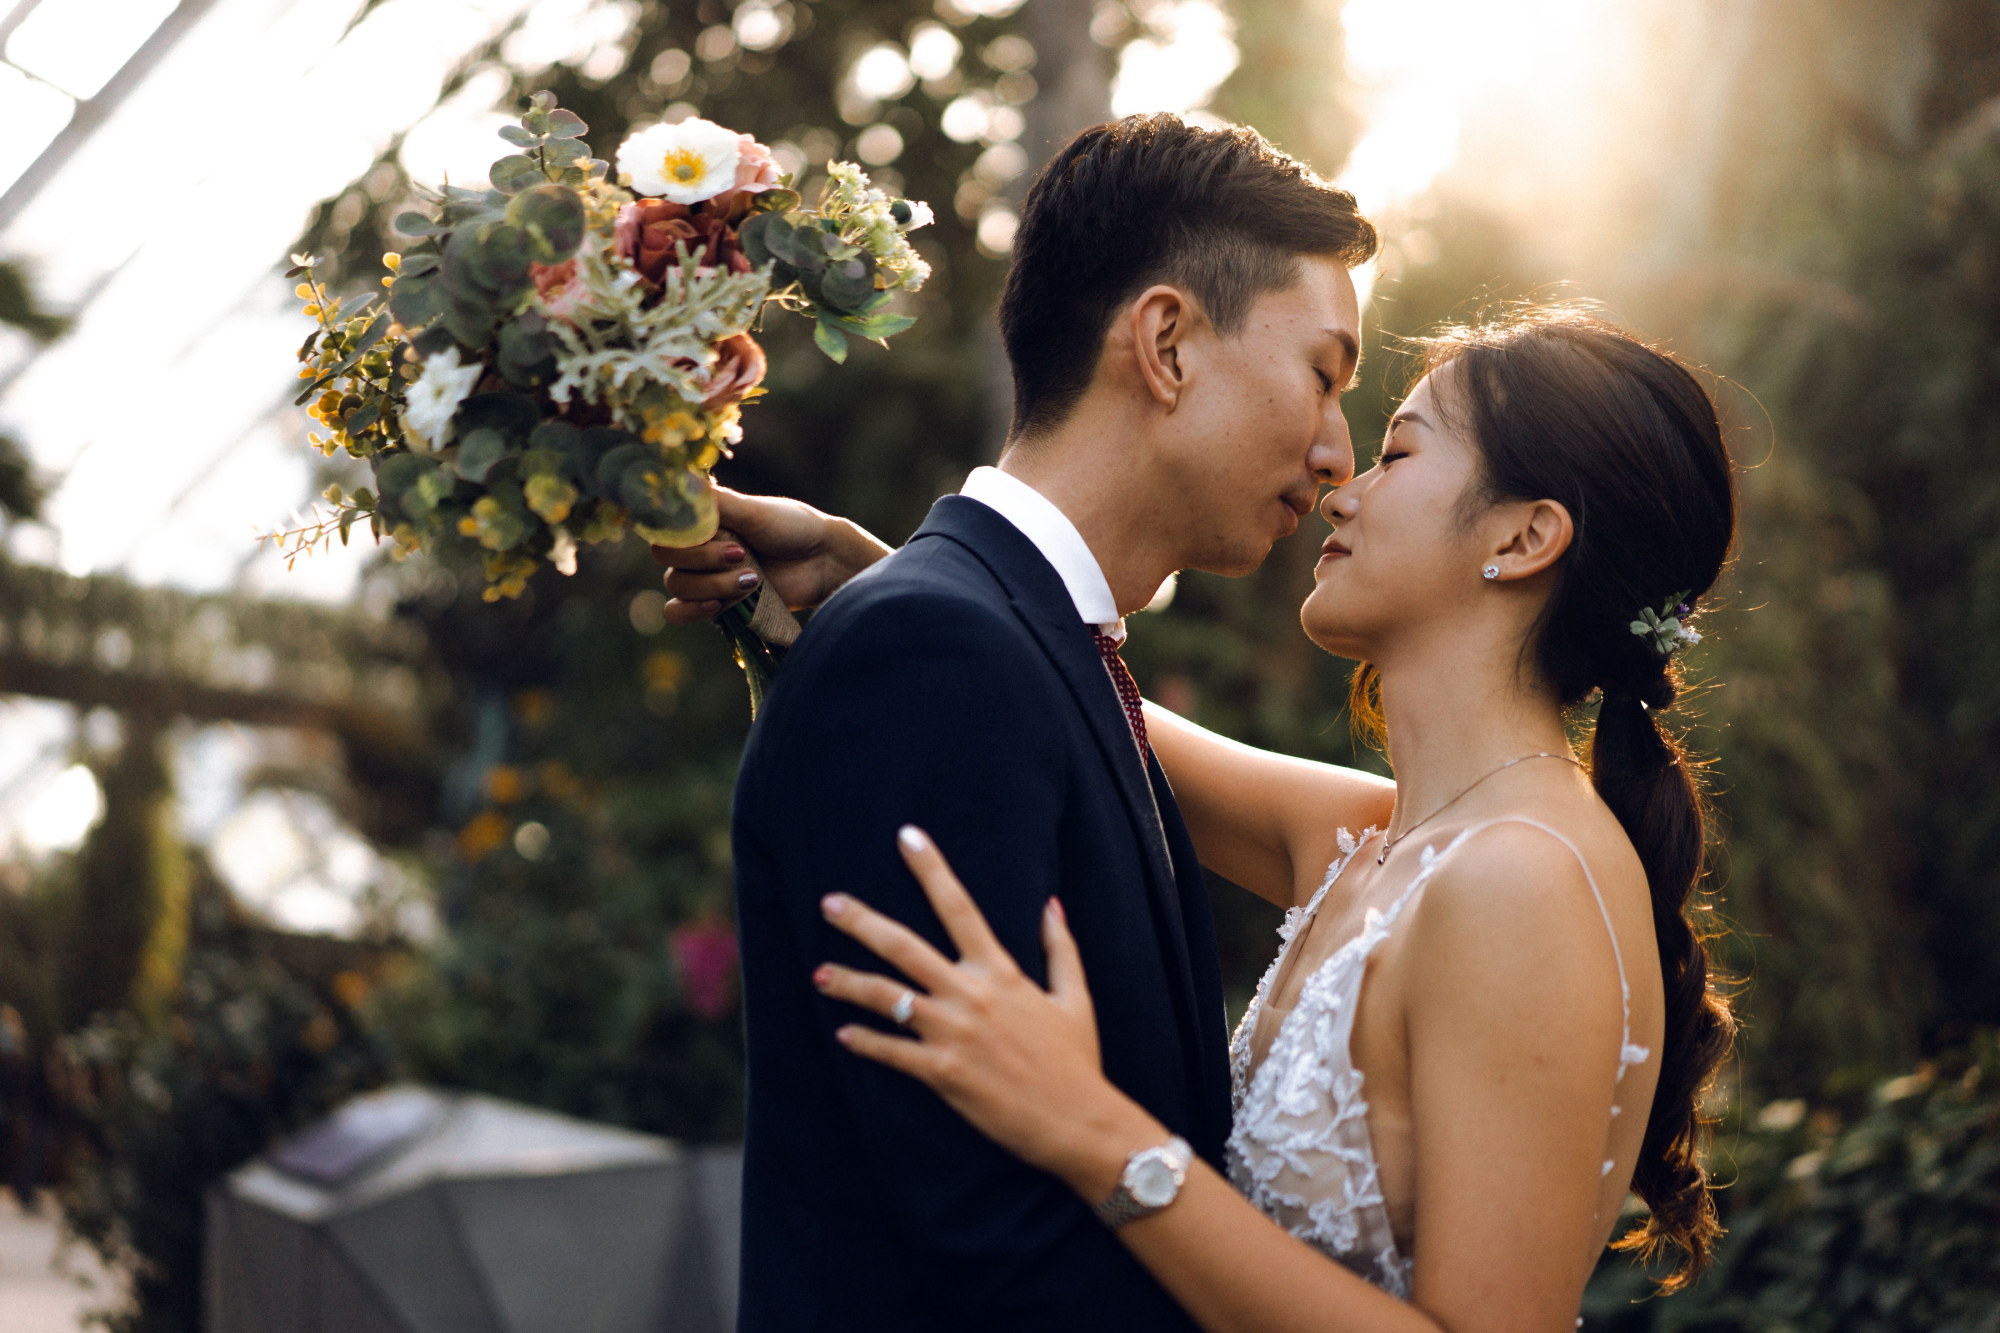 Sunset Prewedding Photoshoot At Cloud Forest, Gardens By The Bay  by Samantha on OneThreeOneFour 8